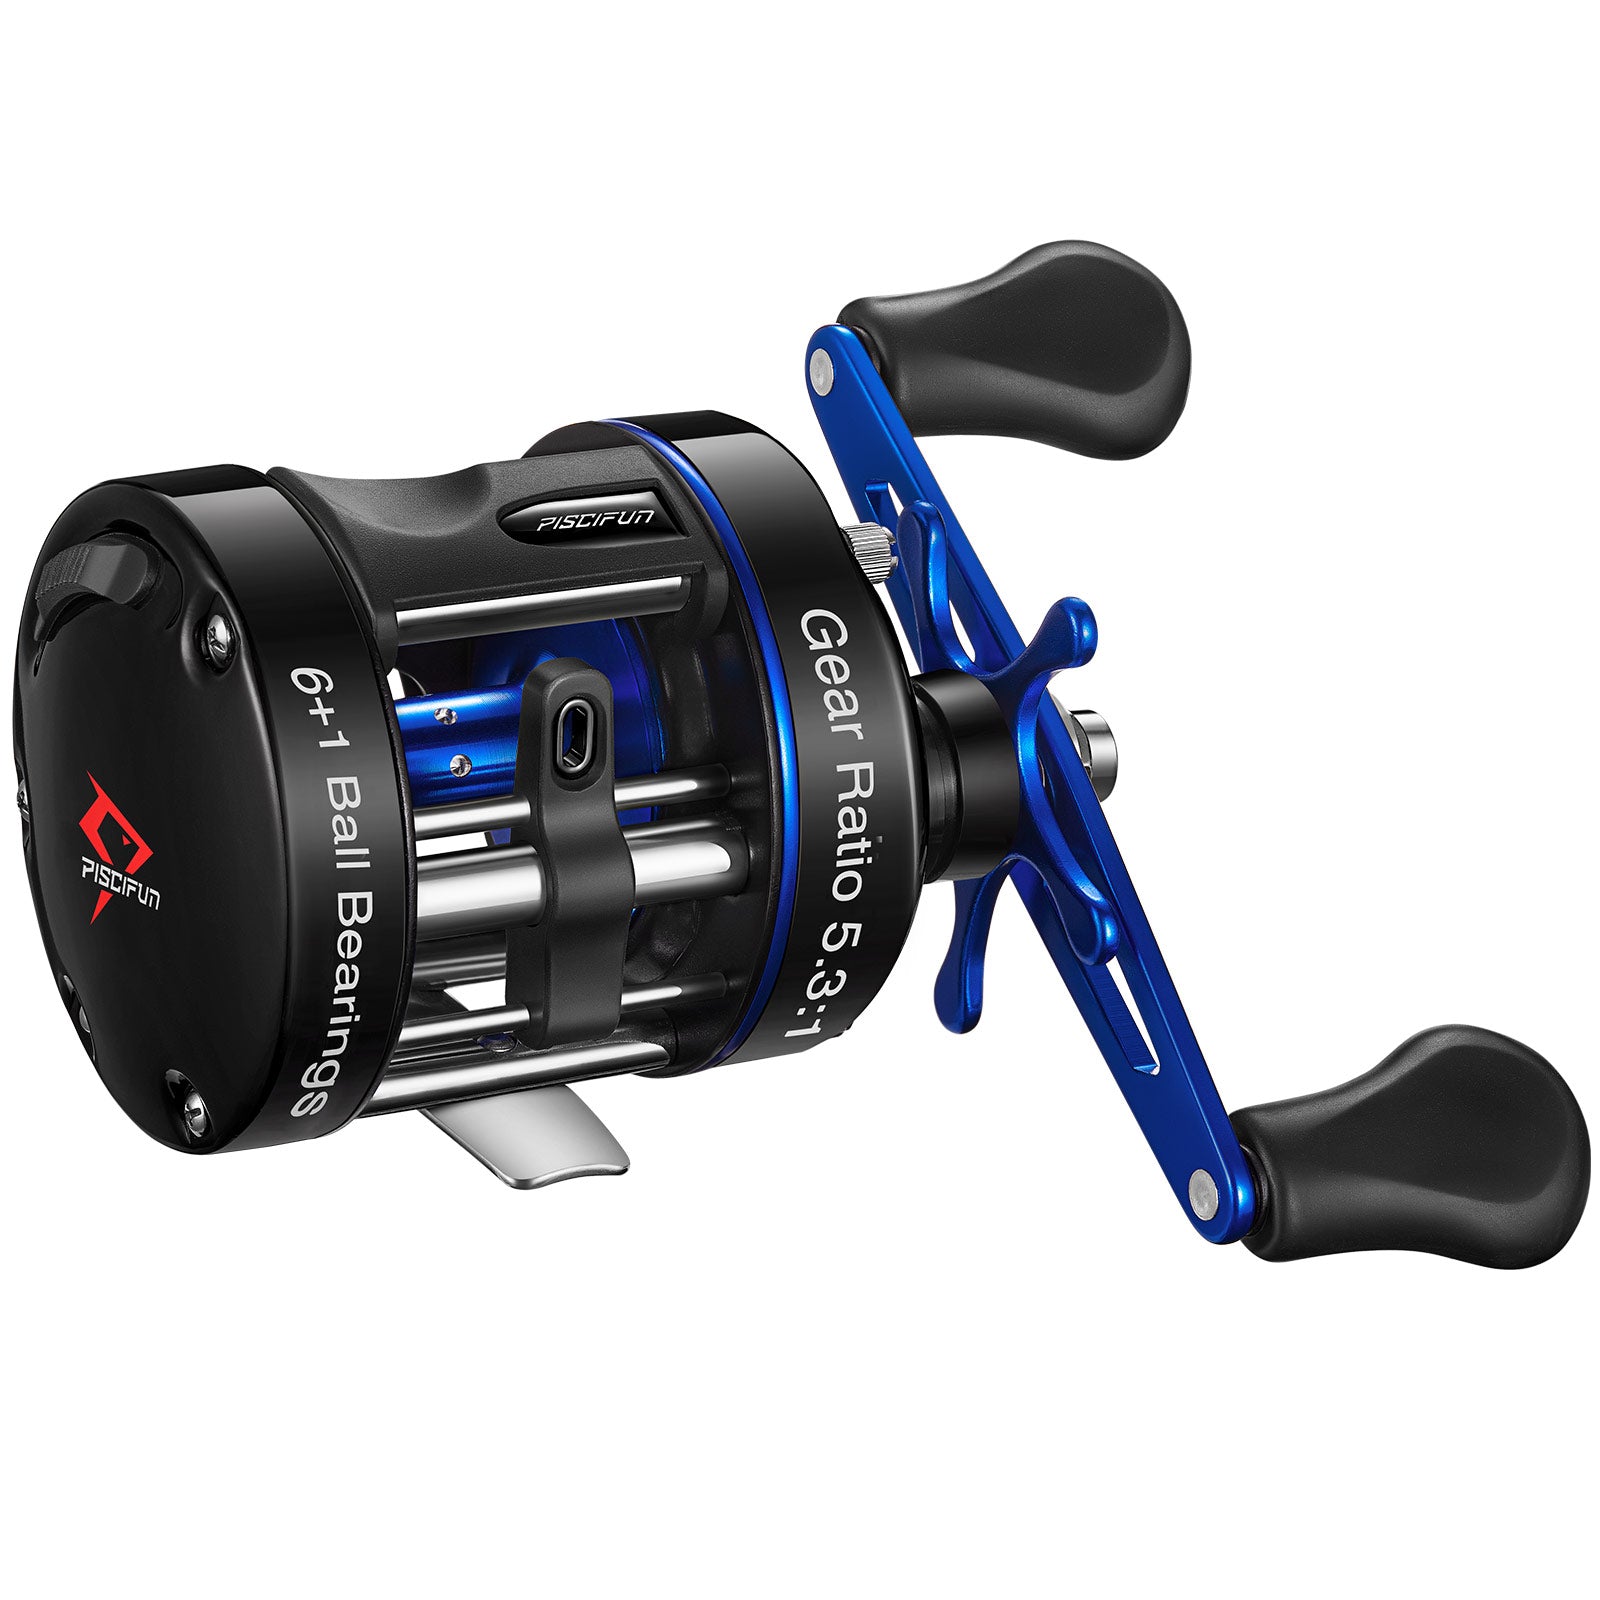 Baitcasting Reels Piscifun Chaos XS Round Reel 5.3 1 Up To 9KG Metal Body  Conventional Saltwater Fishing For Catfish Musky Bass 230617 From Ren05,  $29.74